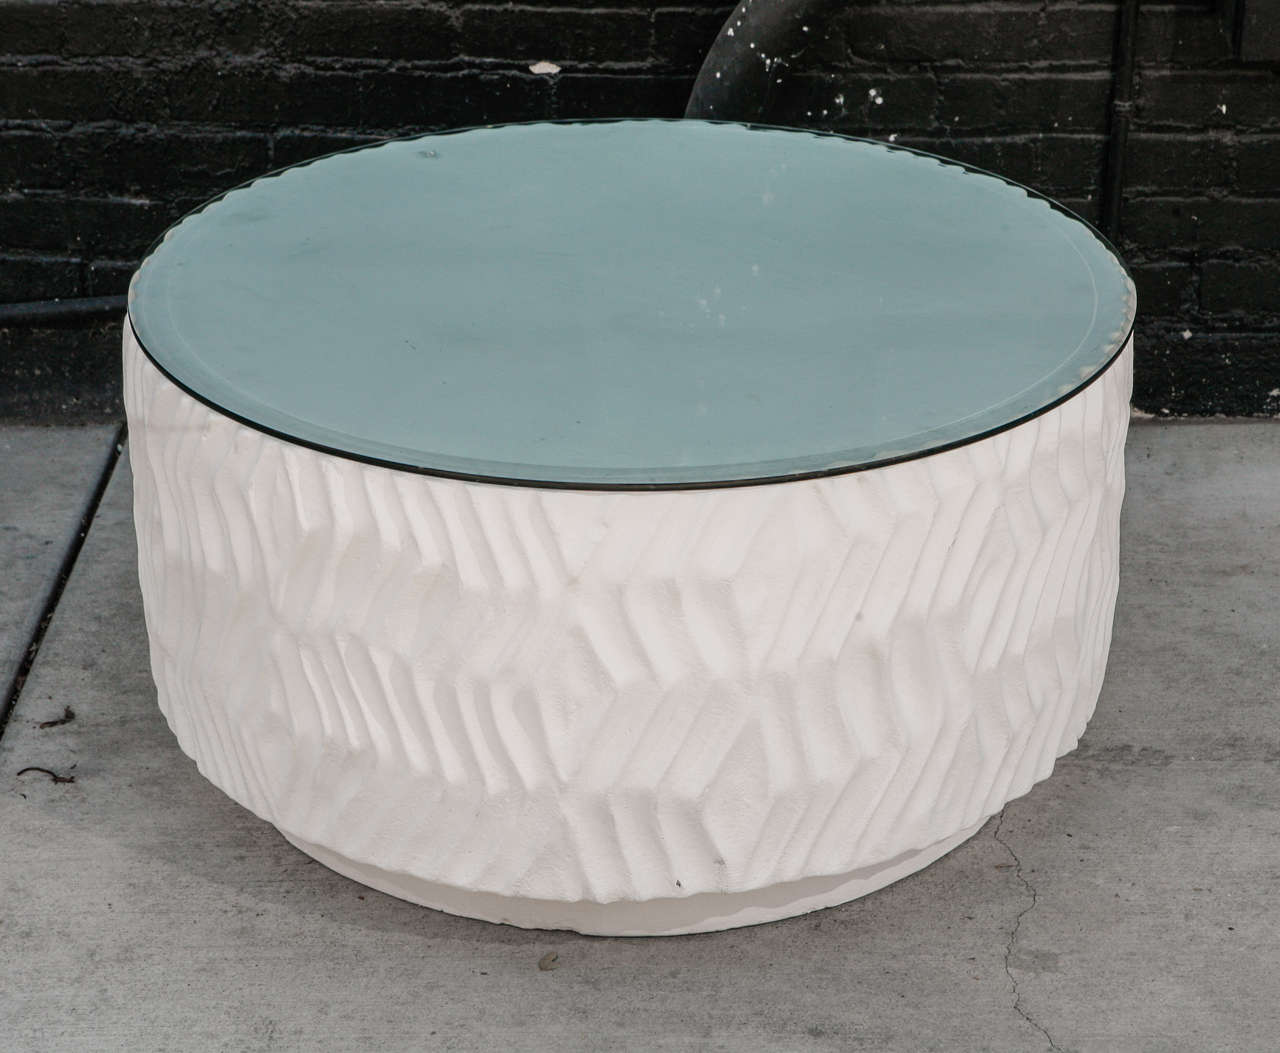 Vintage 1970's White plaster round coffee table with glass top.